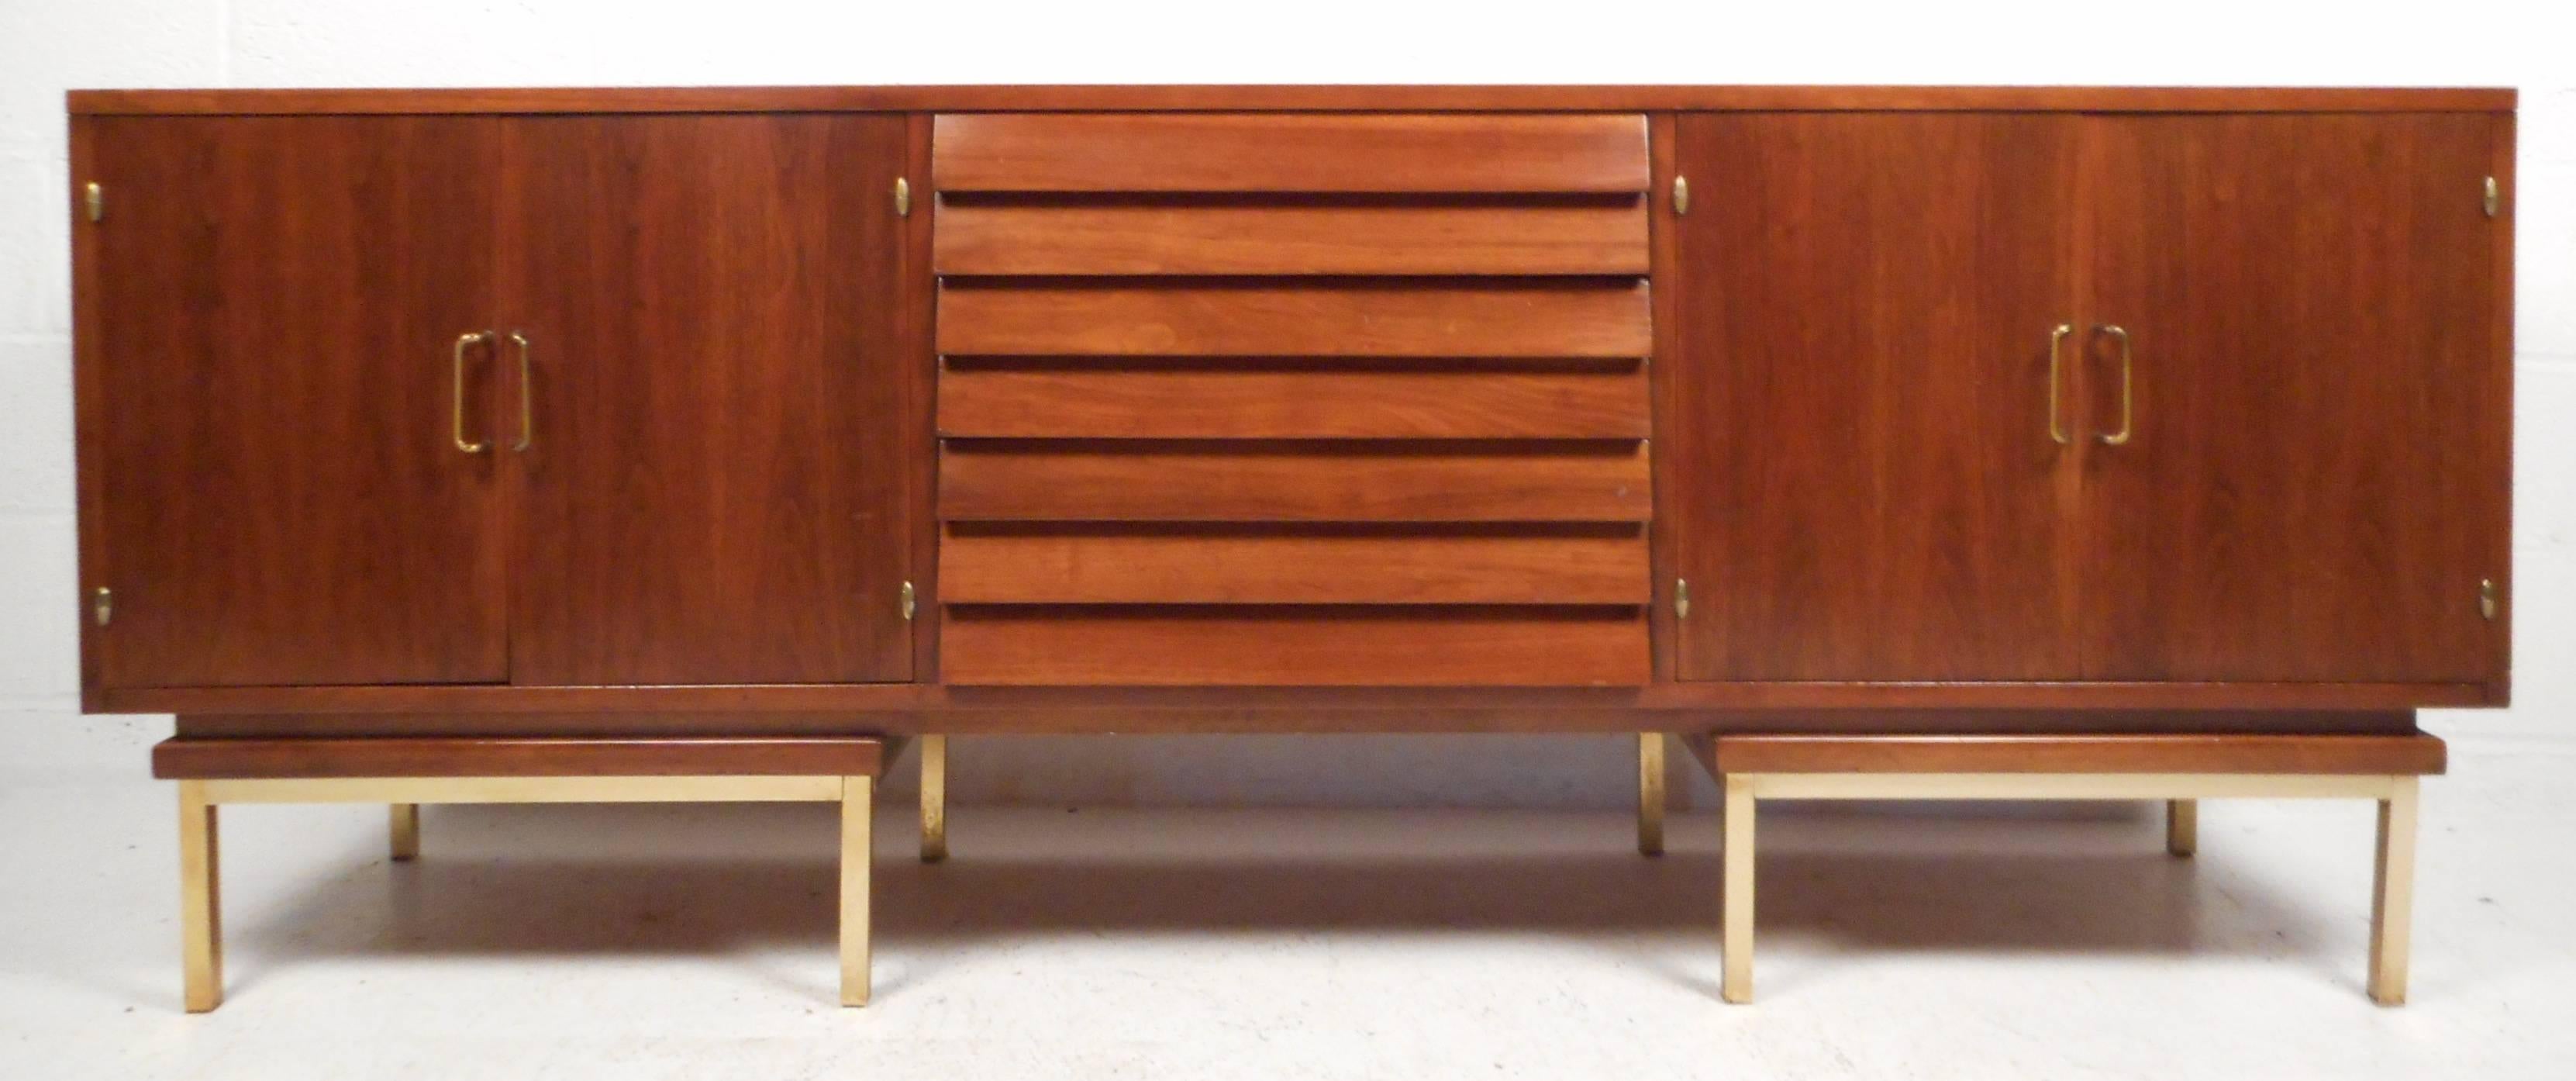 This massive vintage modern sideboard features three louvered drawers in the middle and two large storage compartments on the sides. The rich walnut finish, sculpted brass handles, and unique brass base make this piece an impressive addition to any